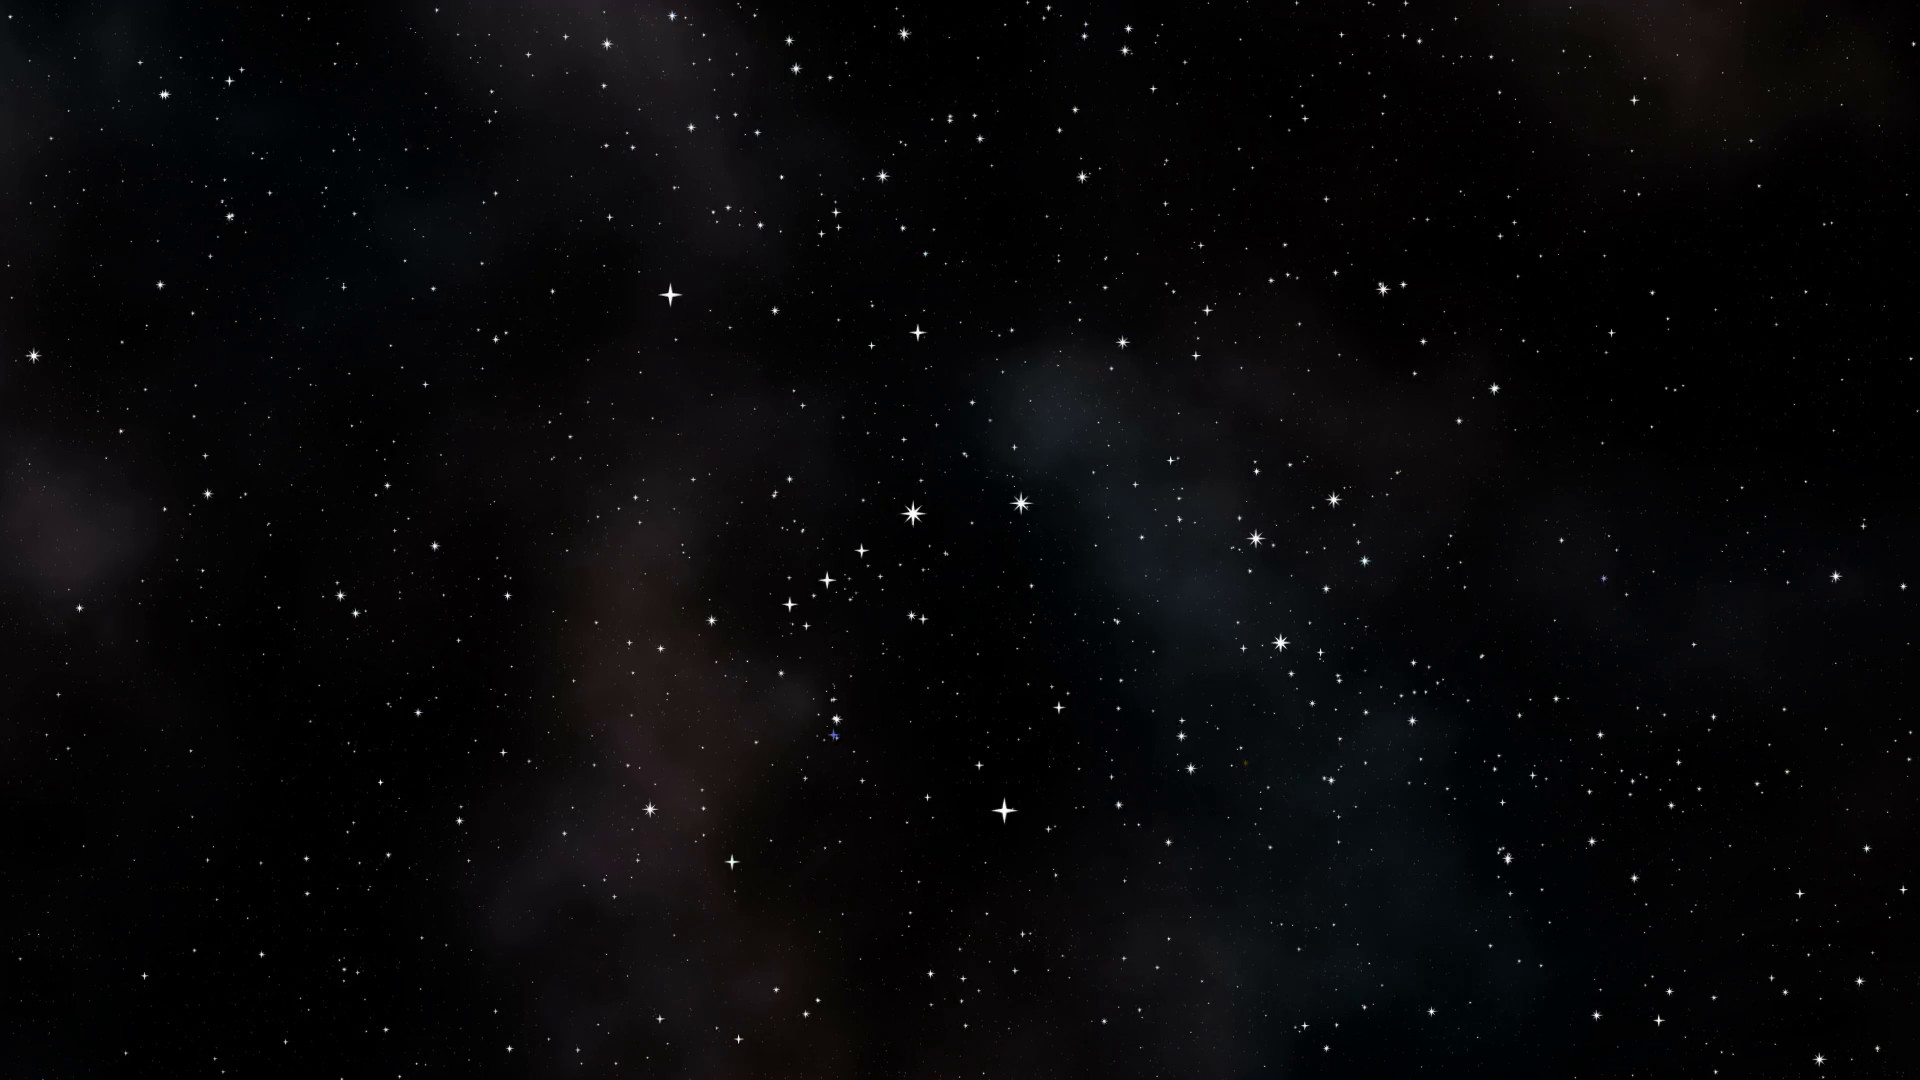 1920x1080 Subscription Library The Heavens 0112: Twinkling stars in black space  (Loop).